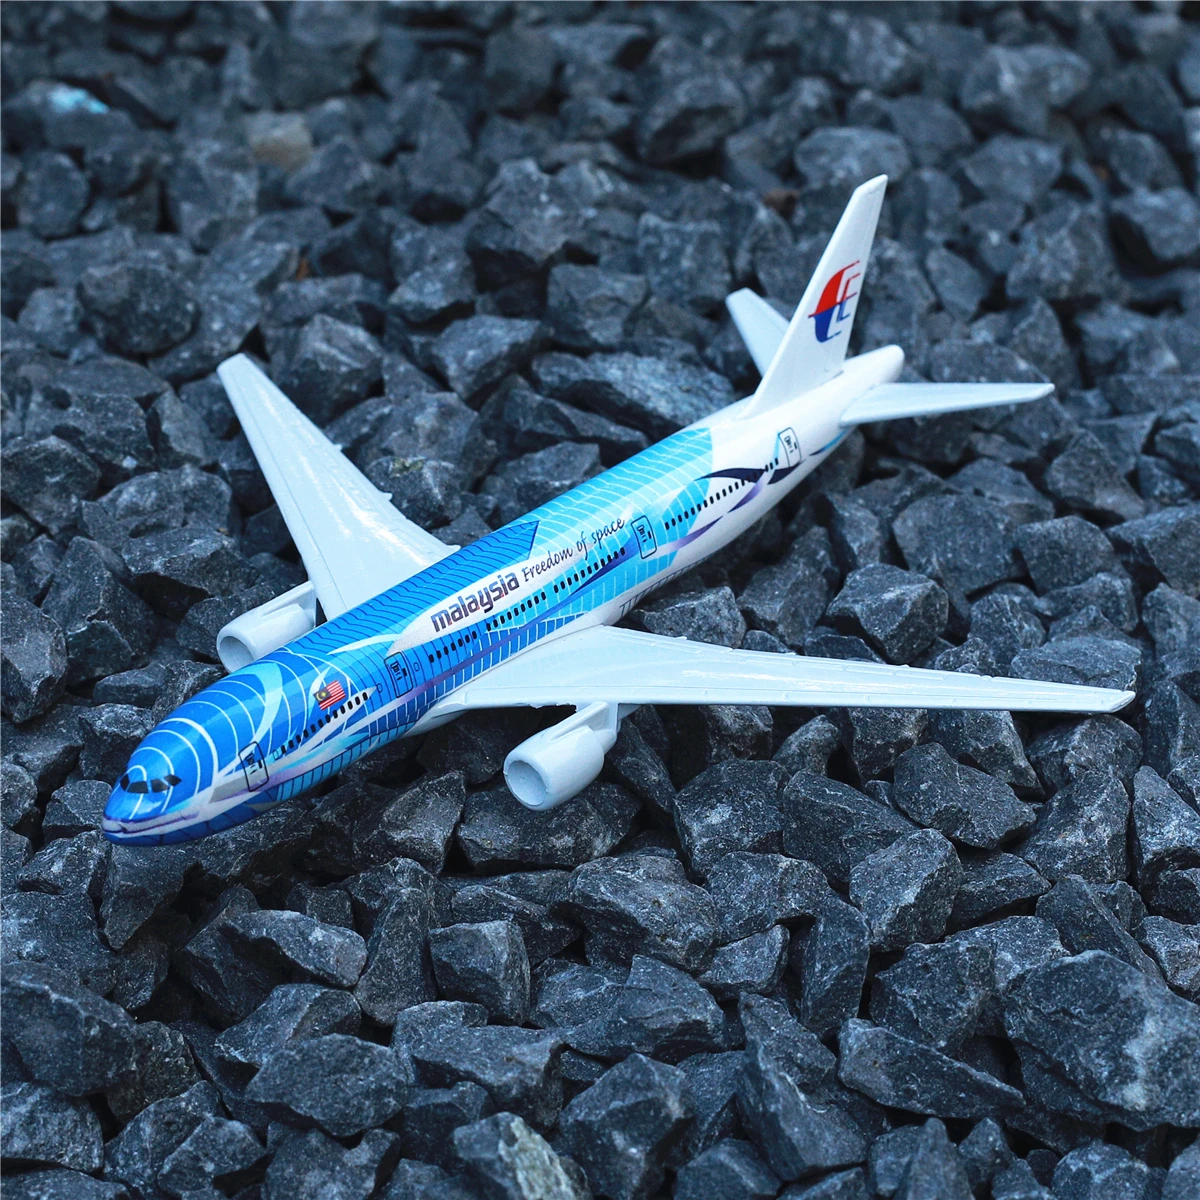 

Malaysia Airlines Waves B777 Aircraft Alloy Diecast Model 15cm World Aviation Collectible Miniature Souvenir Ornament